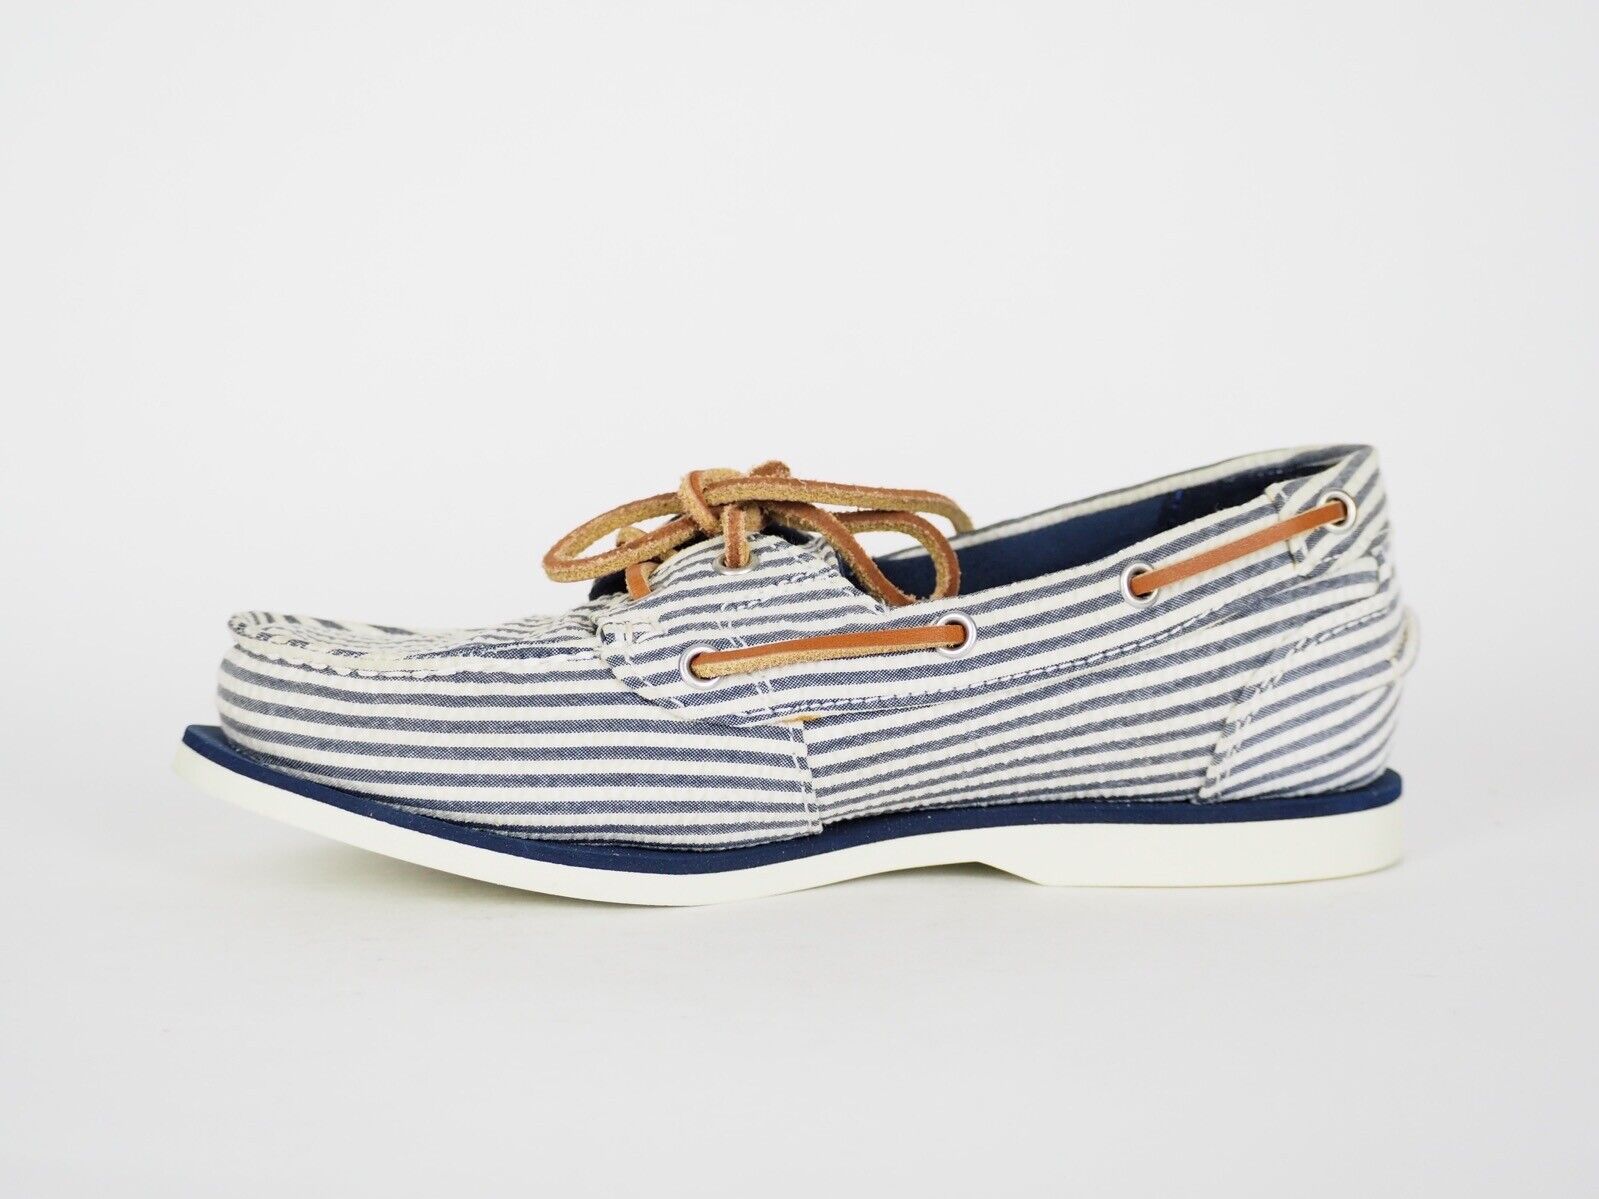 Womens Timberland Classic 2 Eye 8910A Navy Stripe Canvas Boat Shoes UK 3.5 - London Top Style